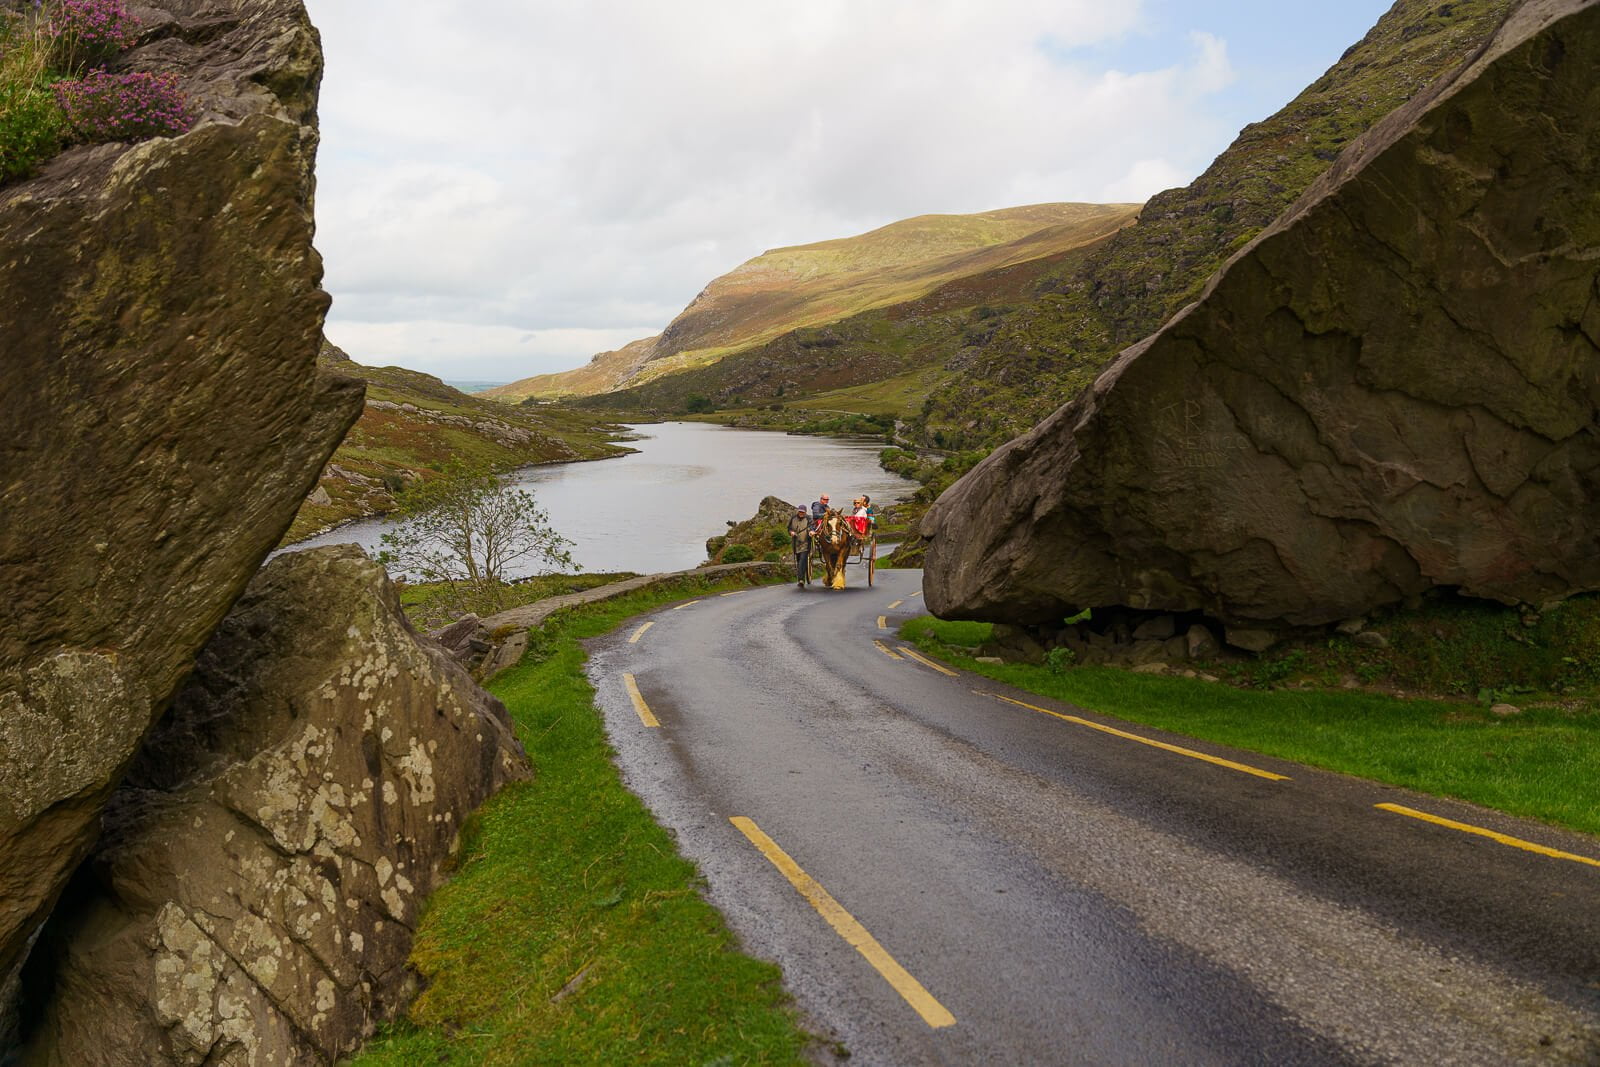 Gap of Dunloe Dave Ryan Media A739224 - Leap Year Proposals in Ireland: When Women Take the Lead in Matters of the Heart - Gabi Bakes Cakes